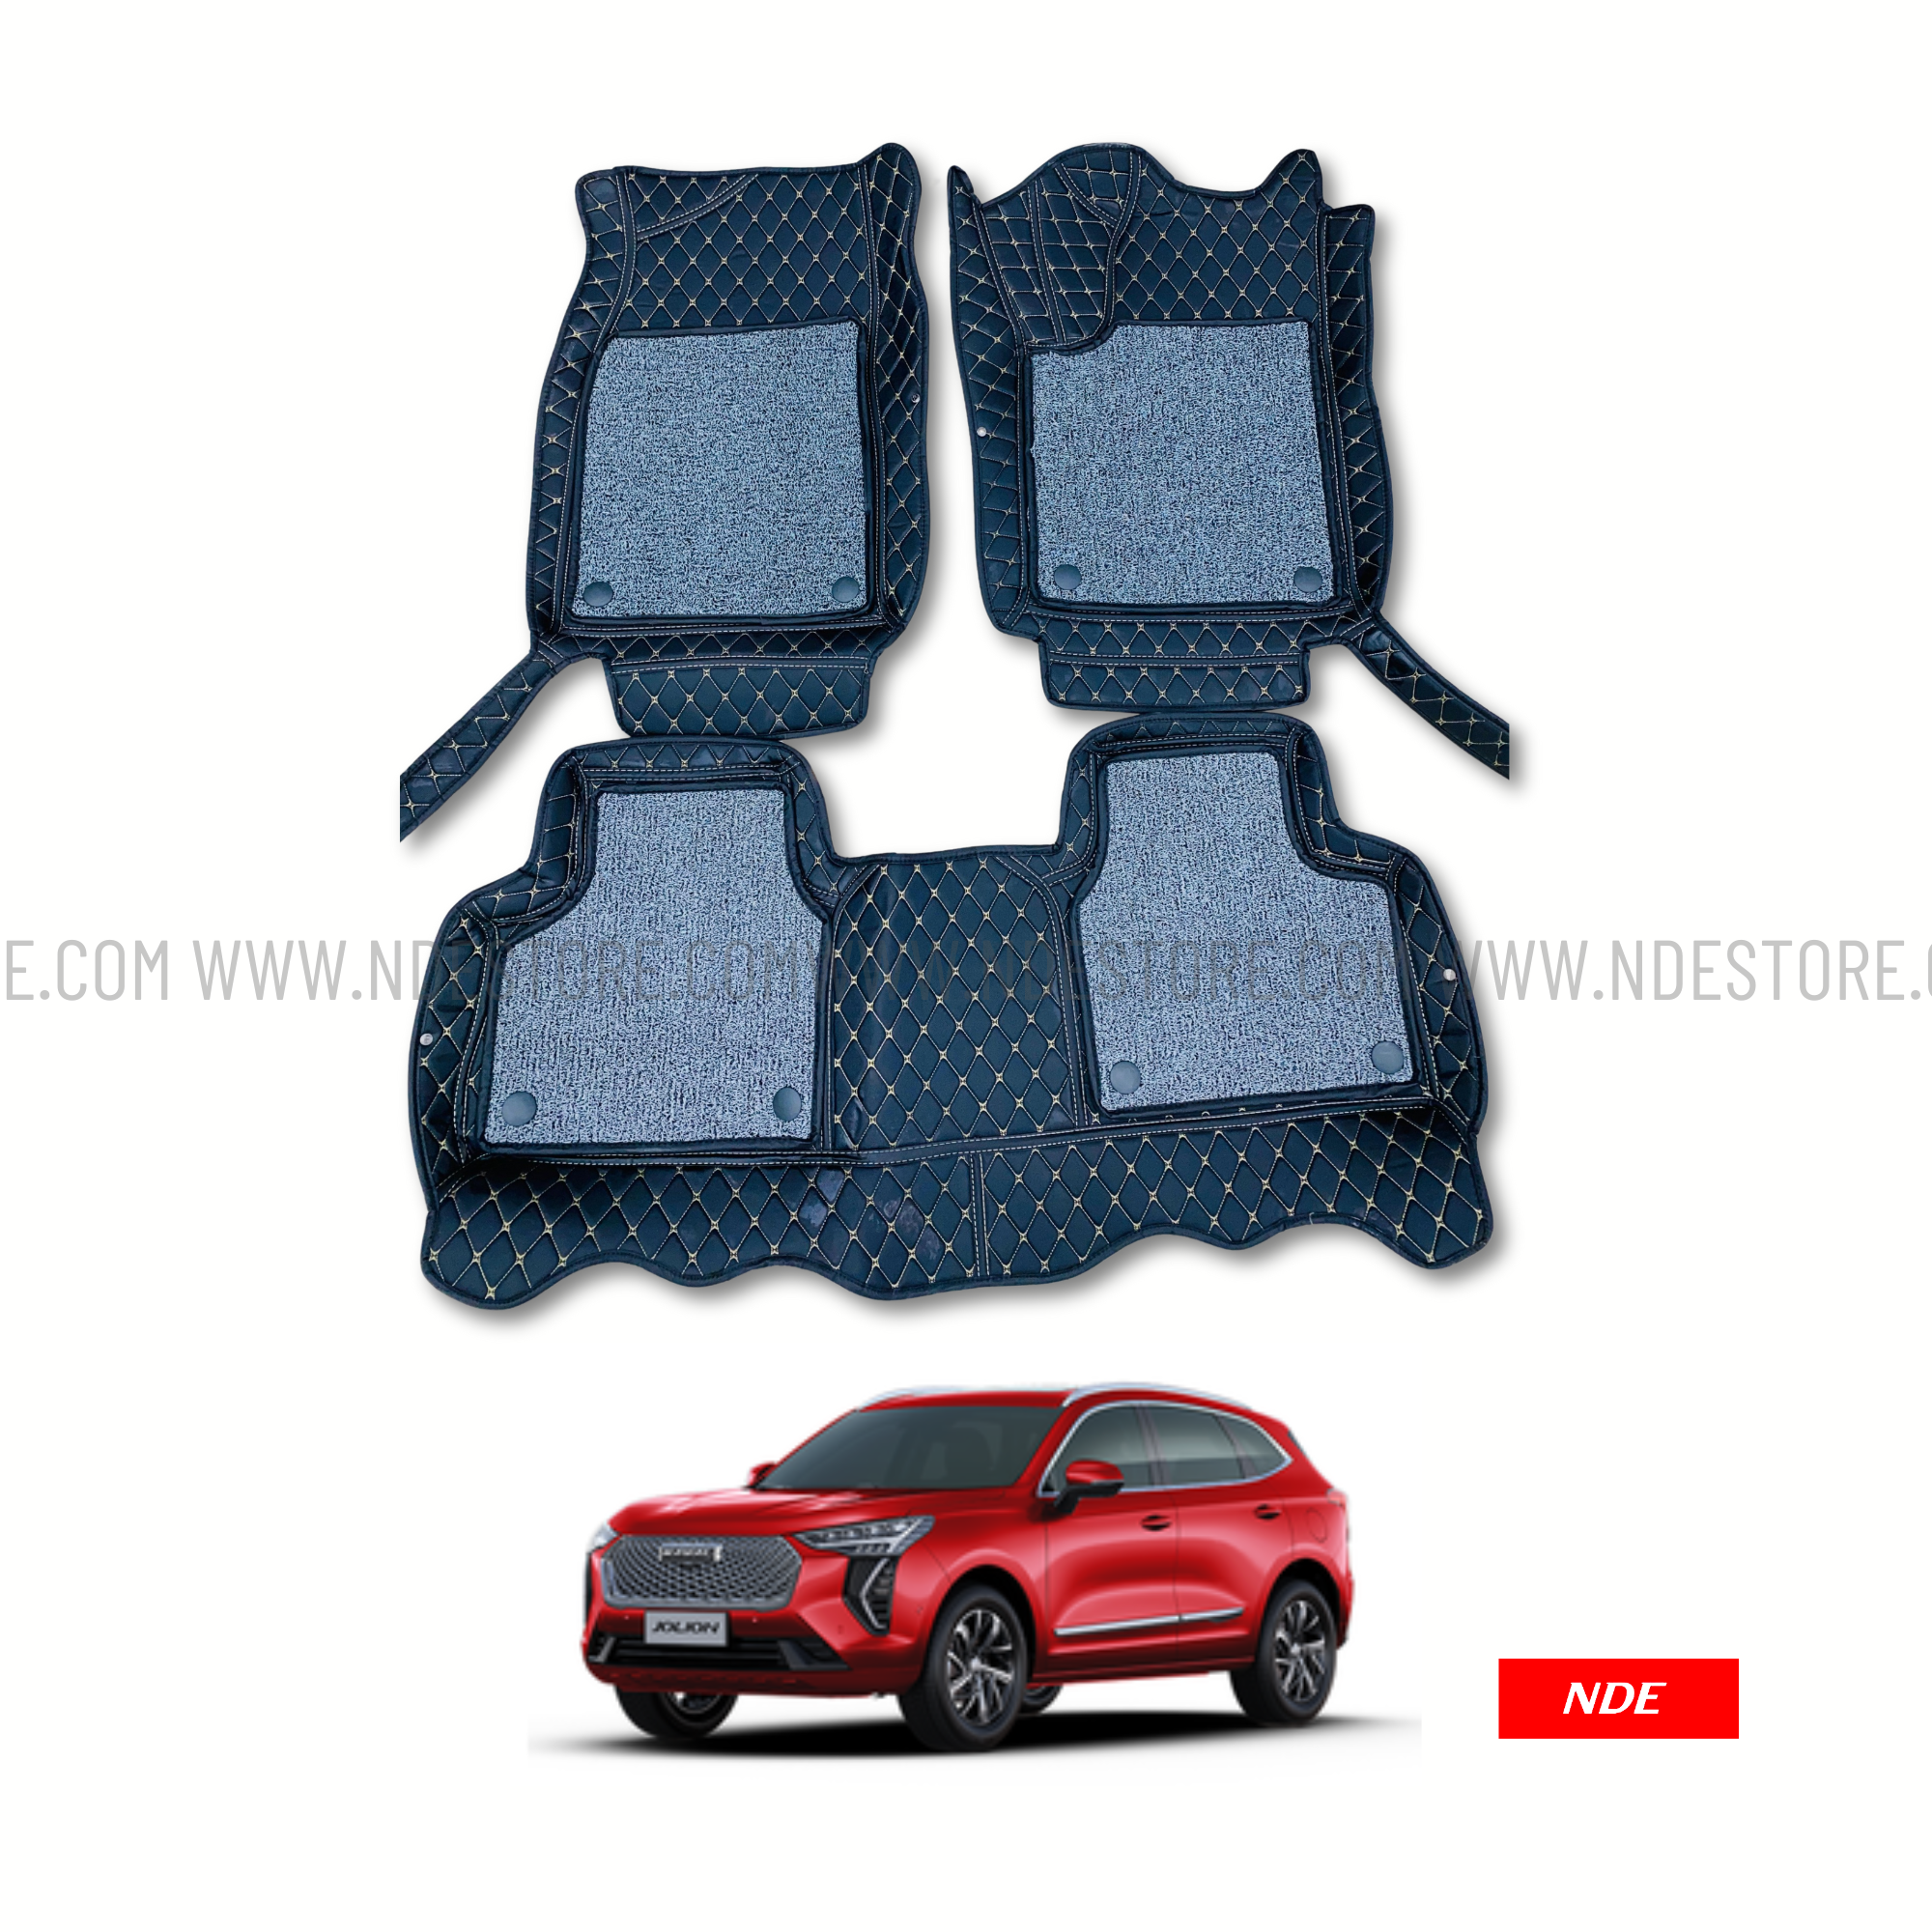 FLOOR MAT 9D STYLE FOR HAVAL H6